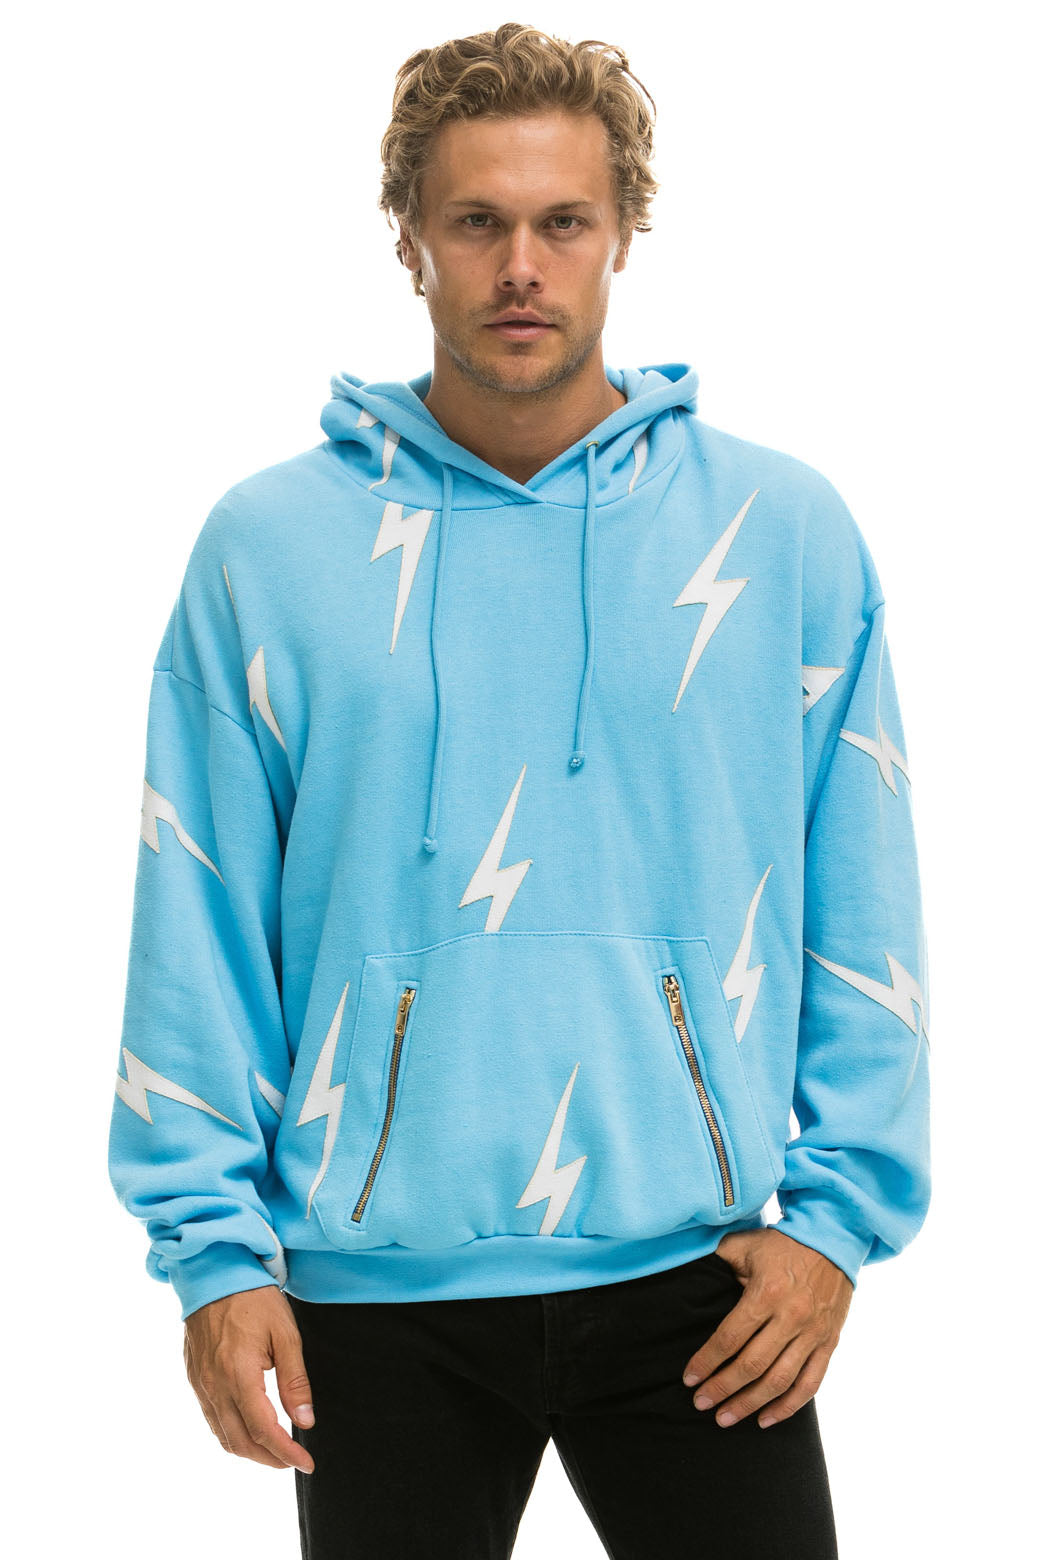 BOLT STITCH REPEAT RELAXED PULLOVER HOODIE WITH POCKET ZIPPERS - SKY // WHITE Hoodie Aviator Nation 